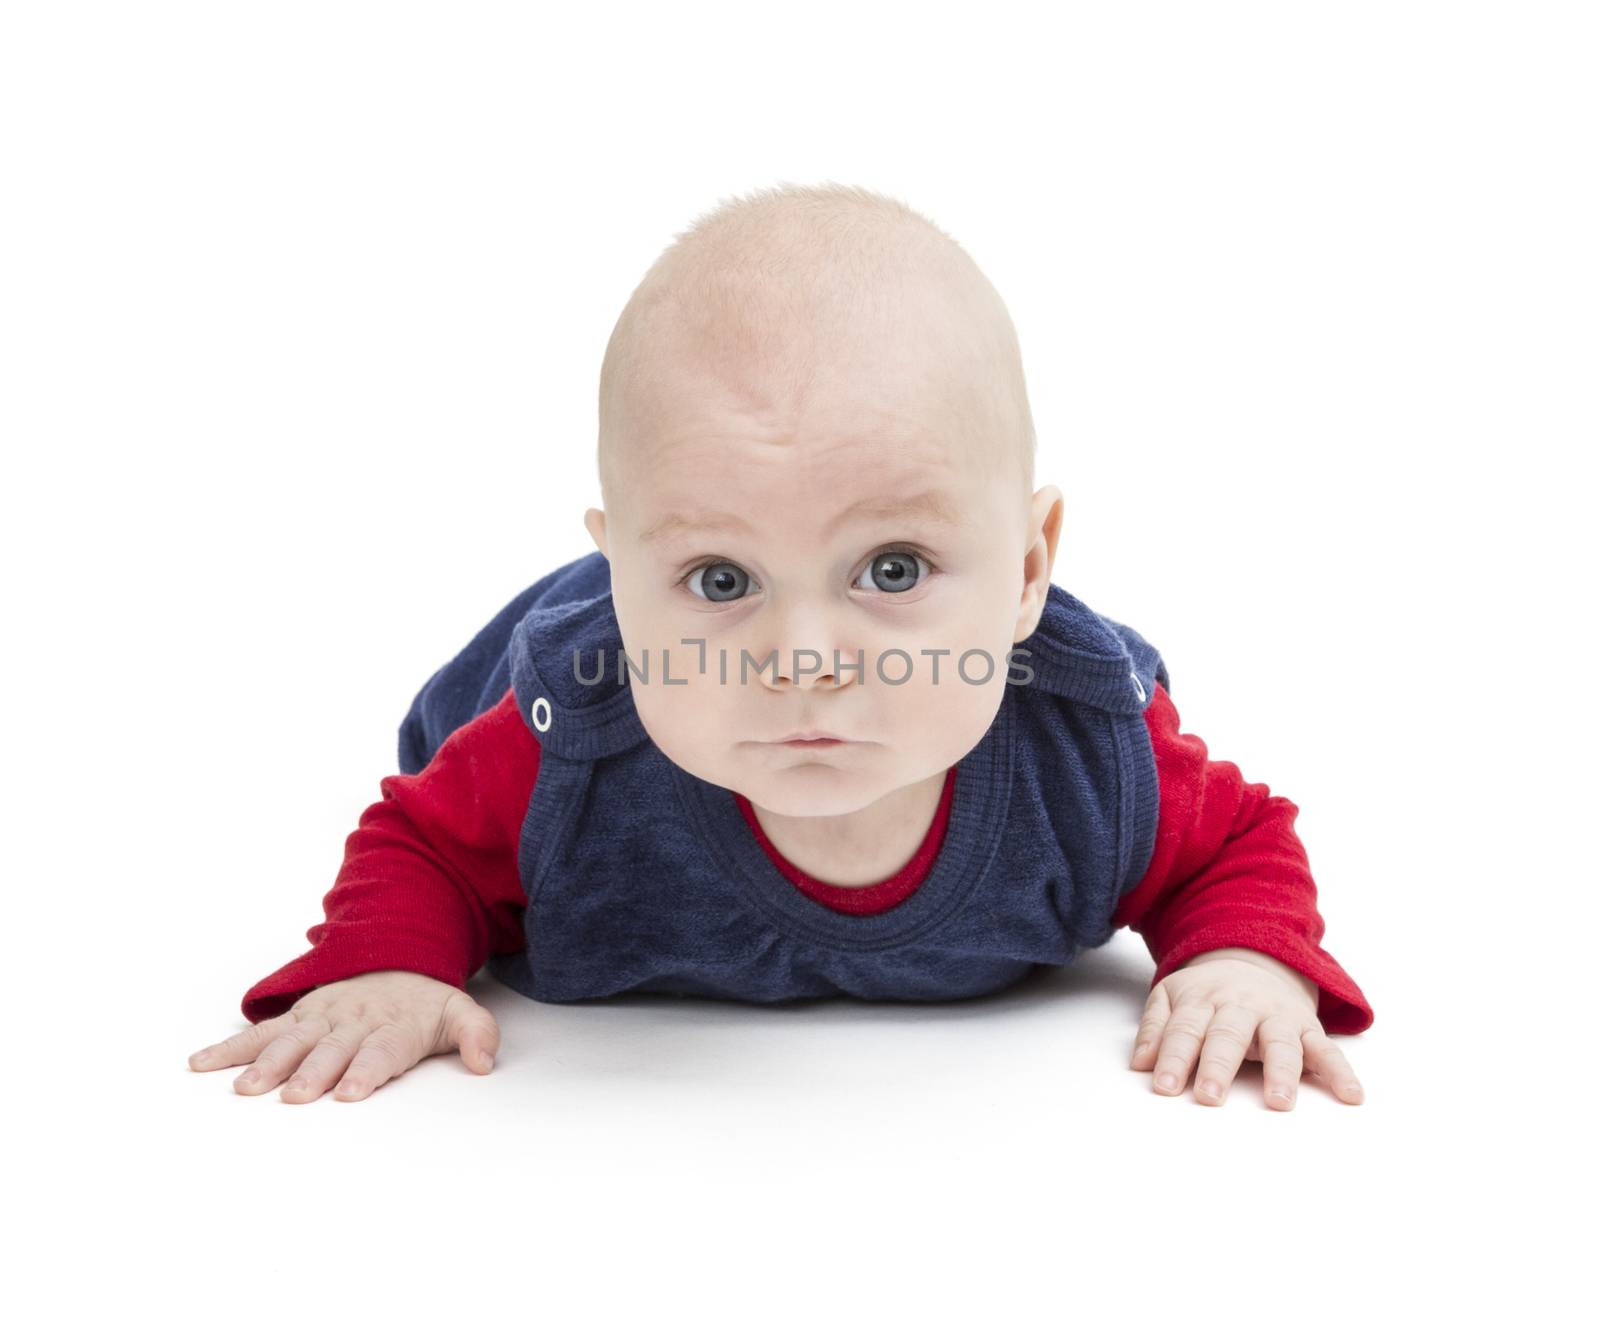 crawling baby looking into camera. isolated on white background